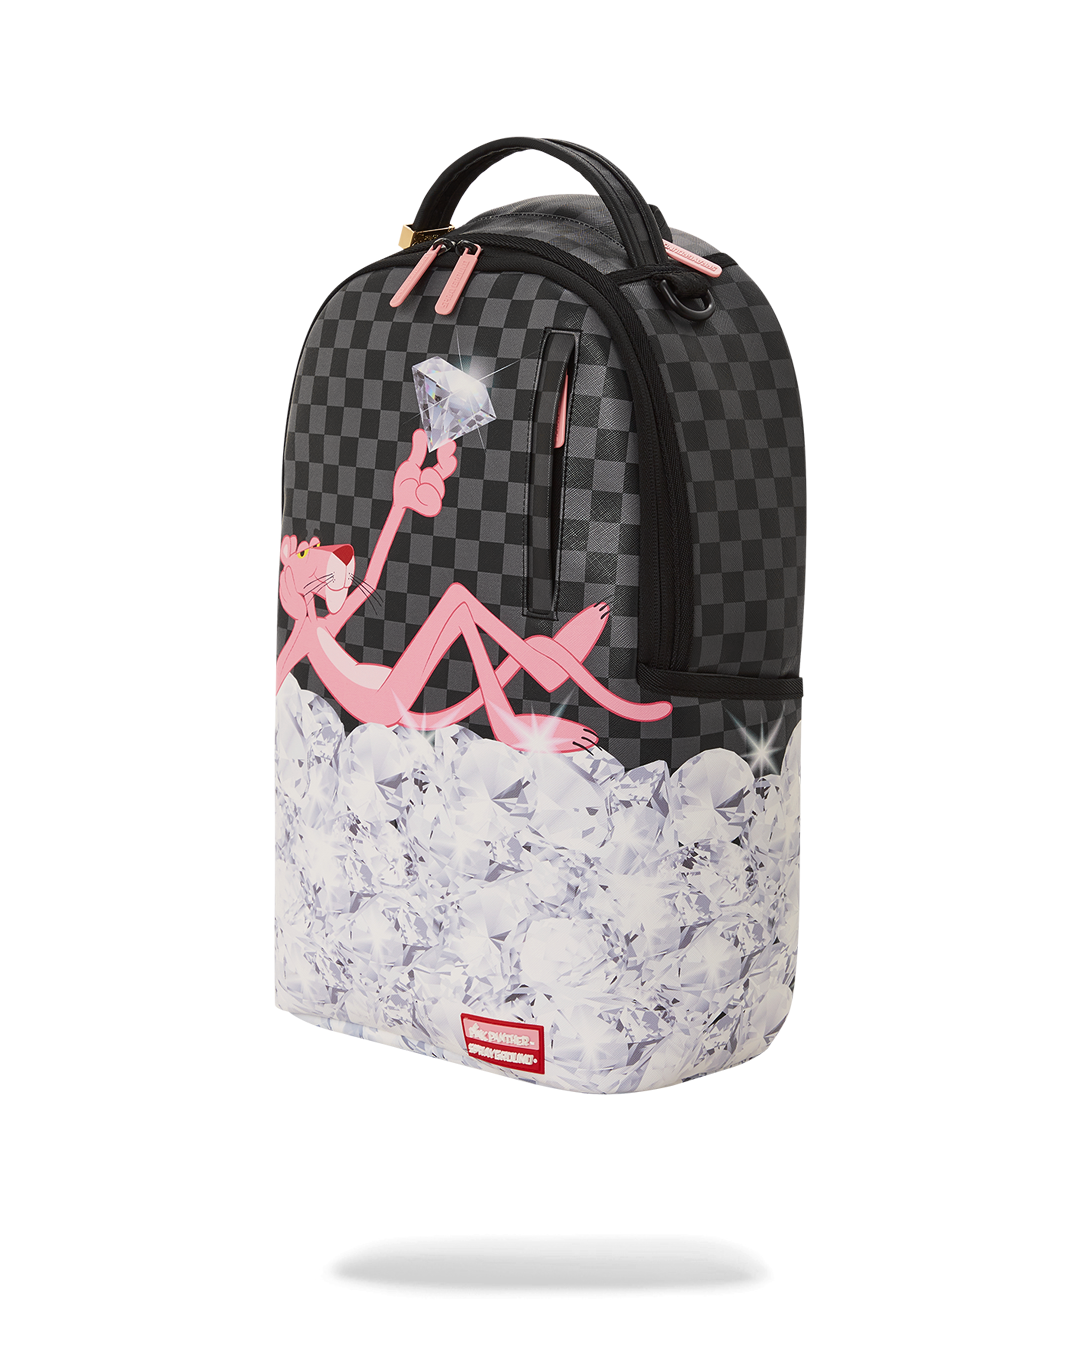 Sprayground Pink Panther Furrrocious Backpack – Limited Edition - RunNWalk